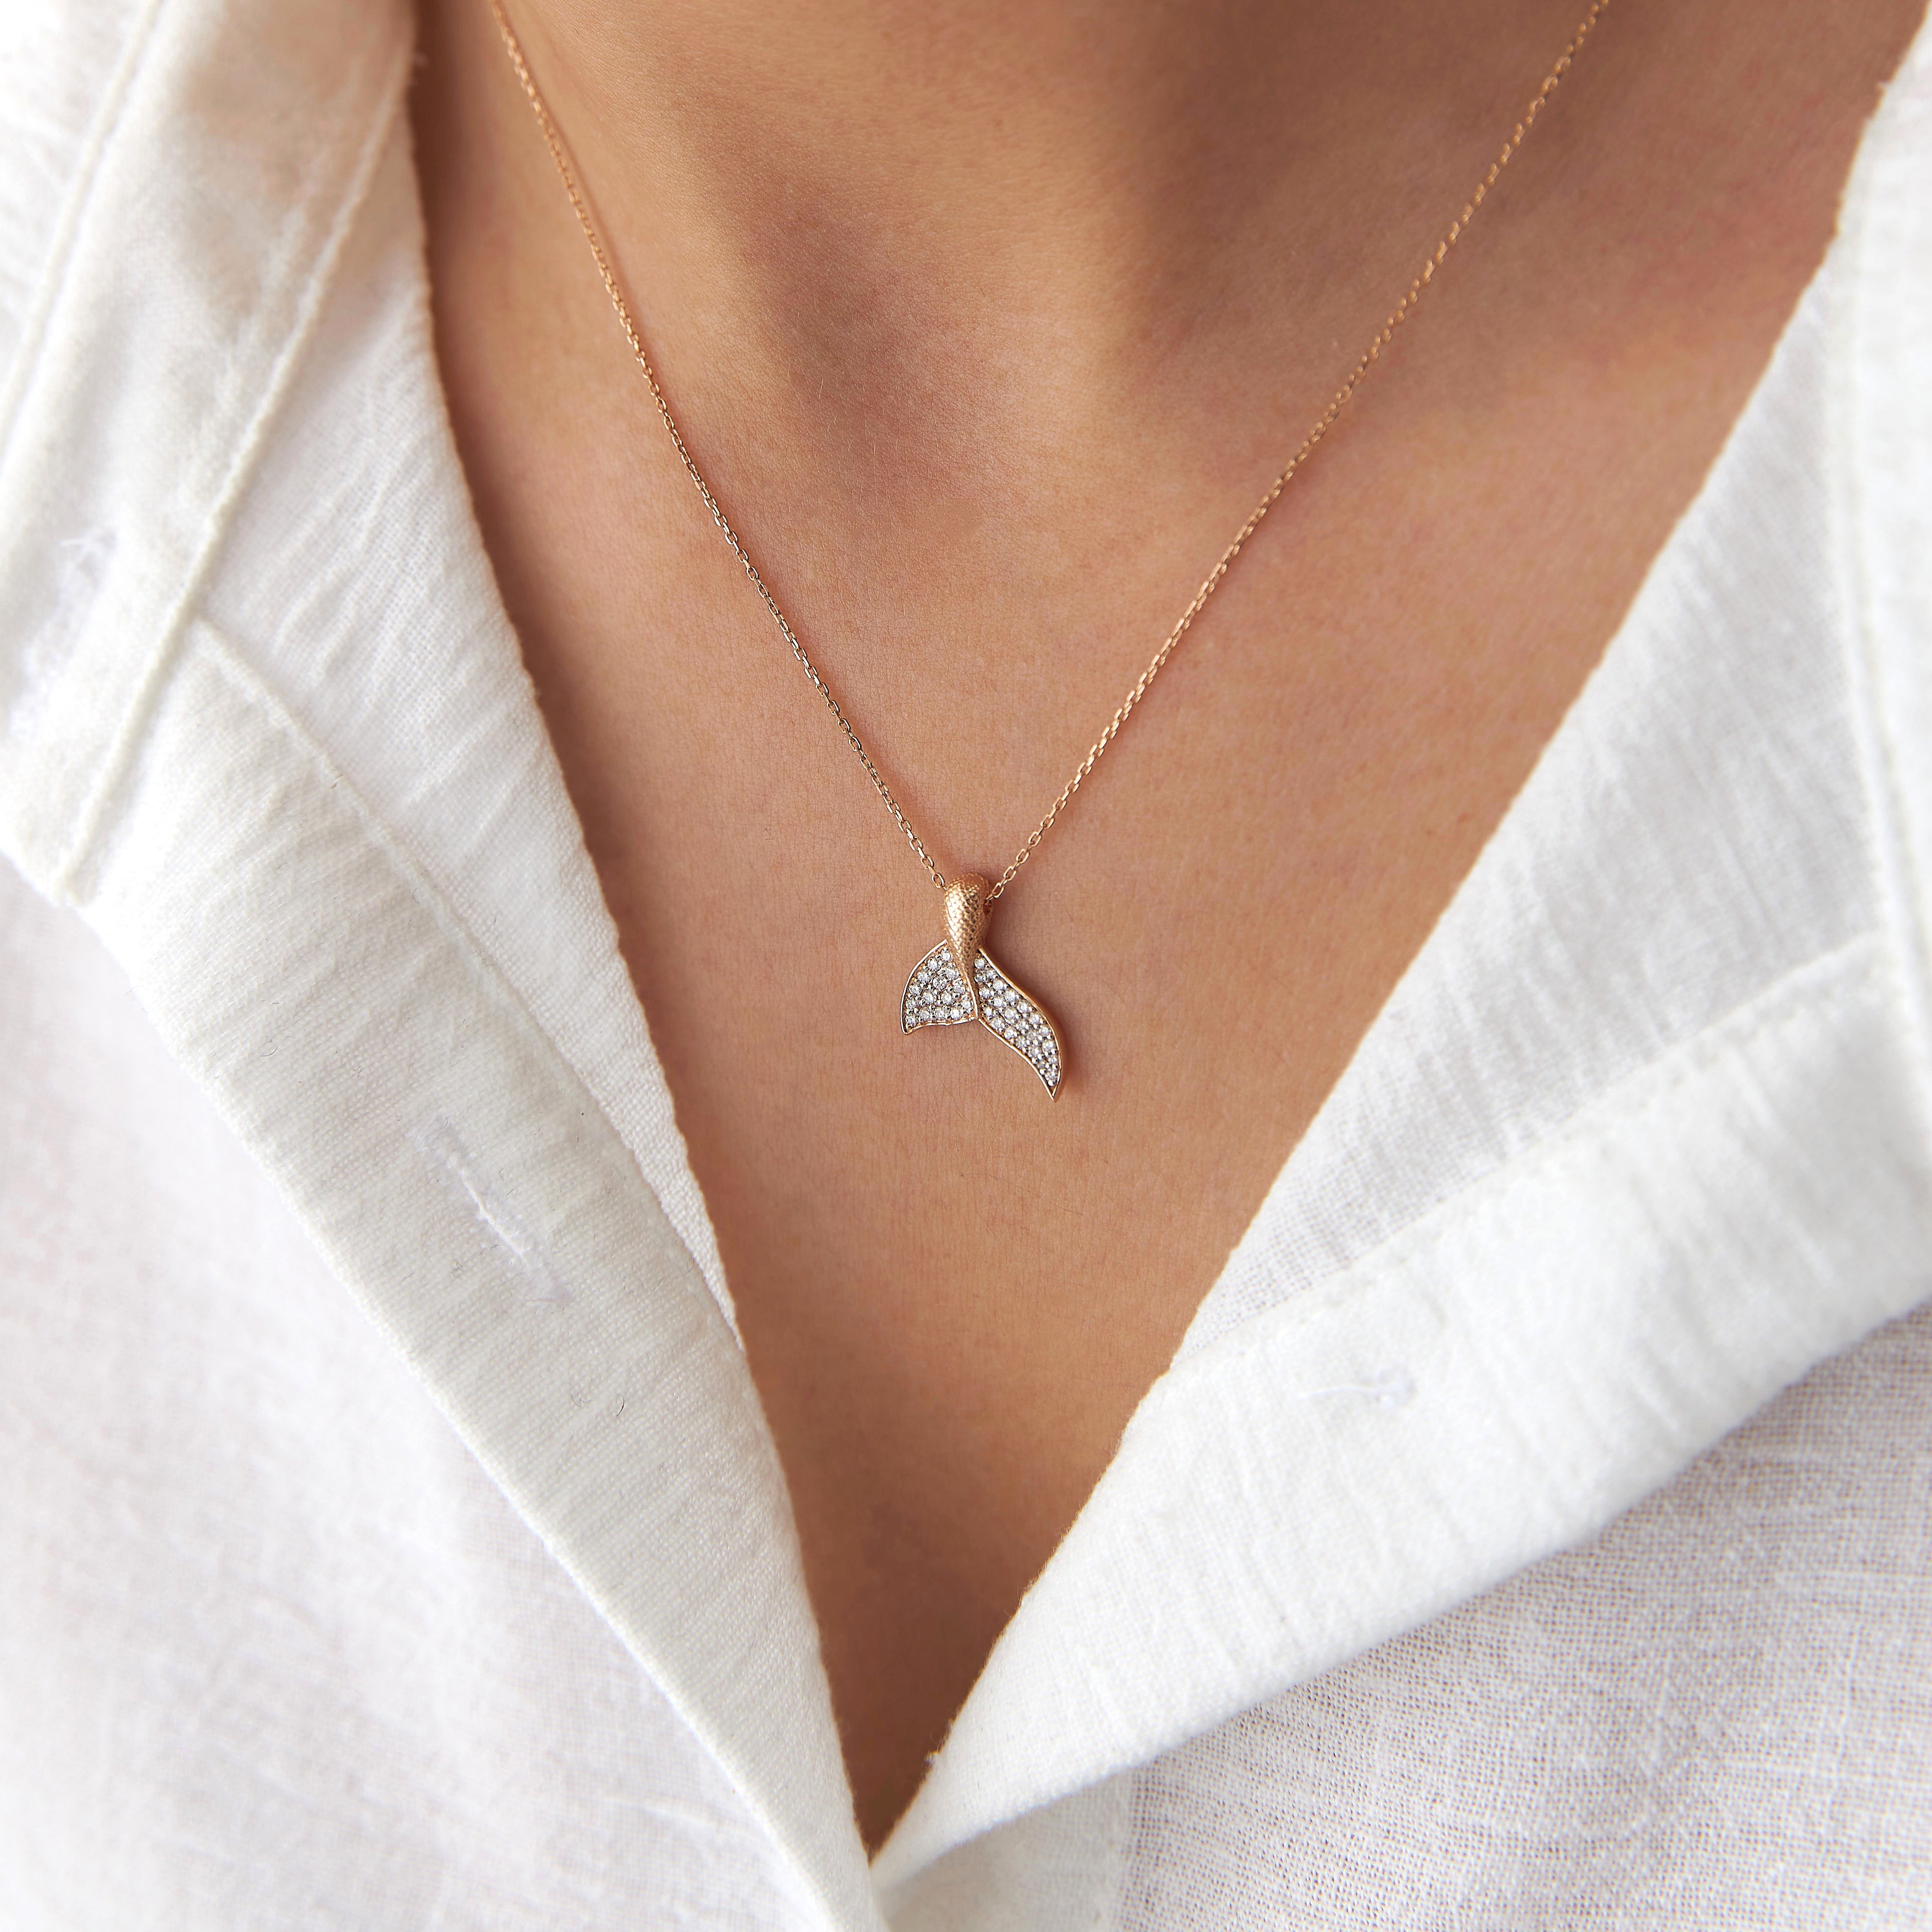 Diamond Whale Tail Necklace in 14K Gold